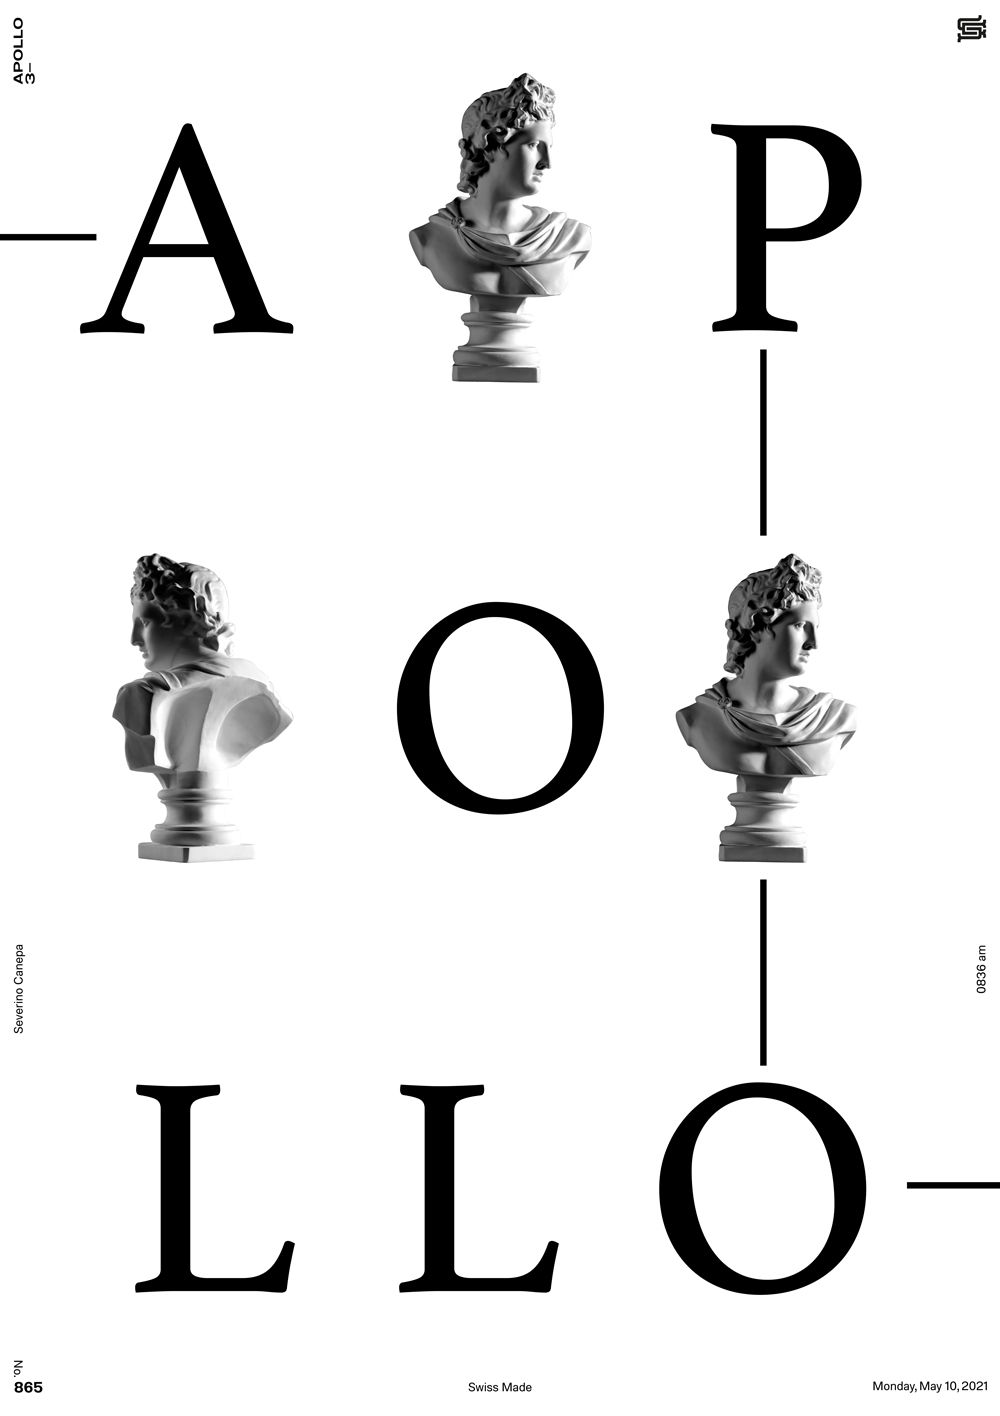 Minimalist artwok on which I used typography and Apollo's Statue